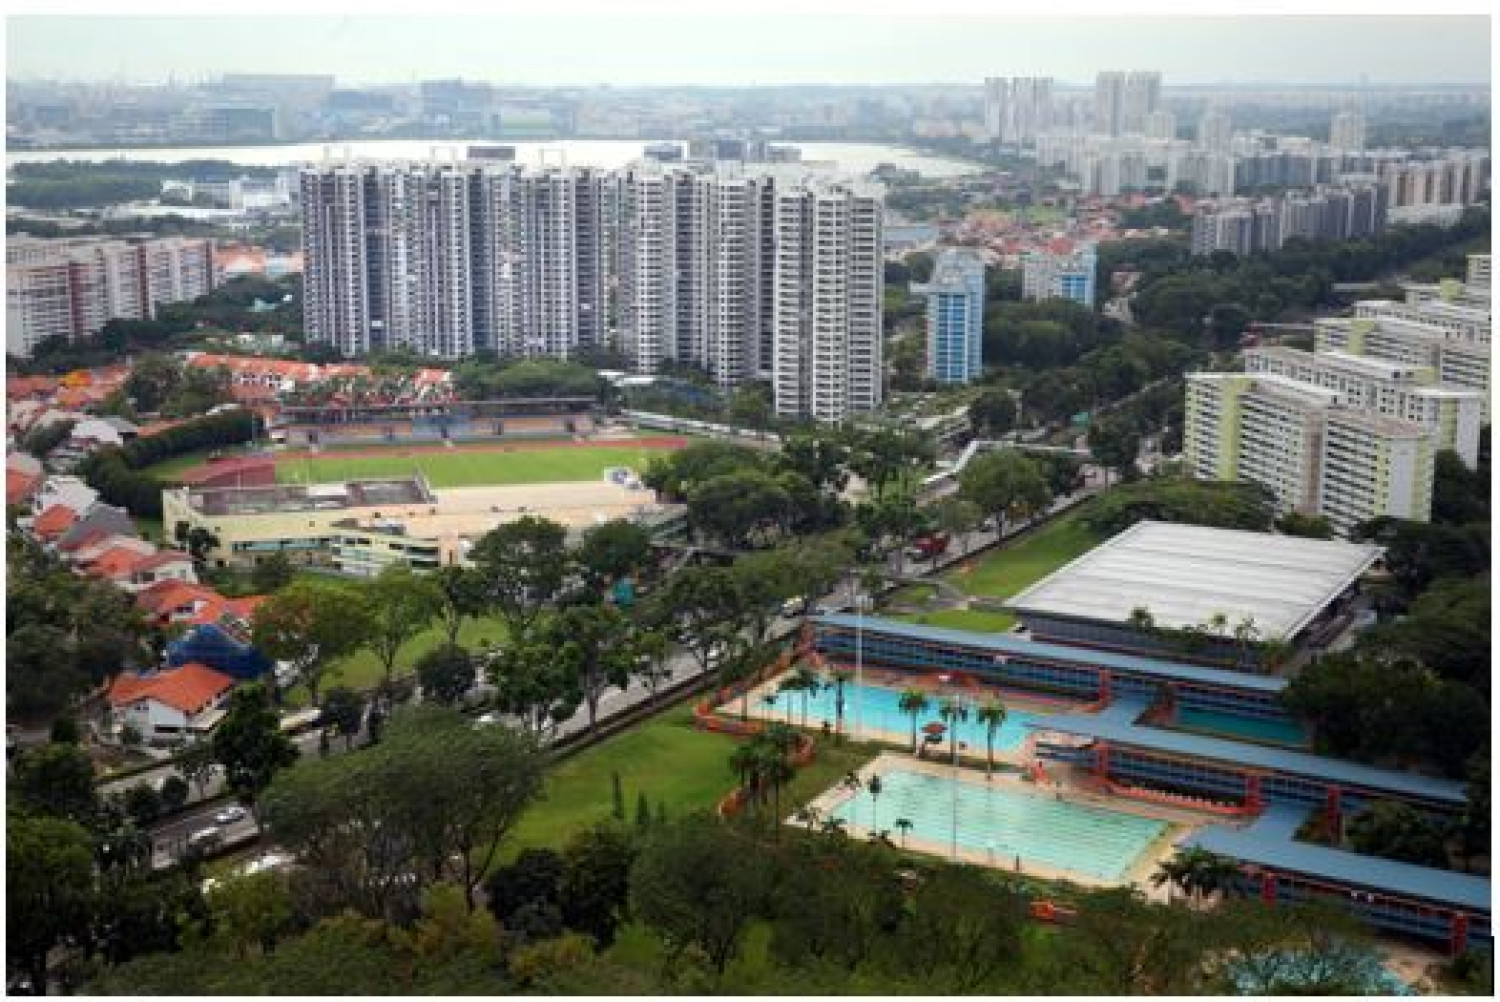 ANALYSIS: Which HDB towns will benefit upgraders? - Property News